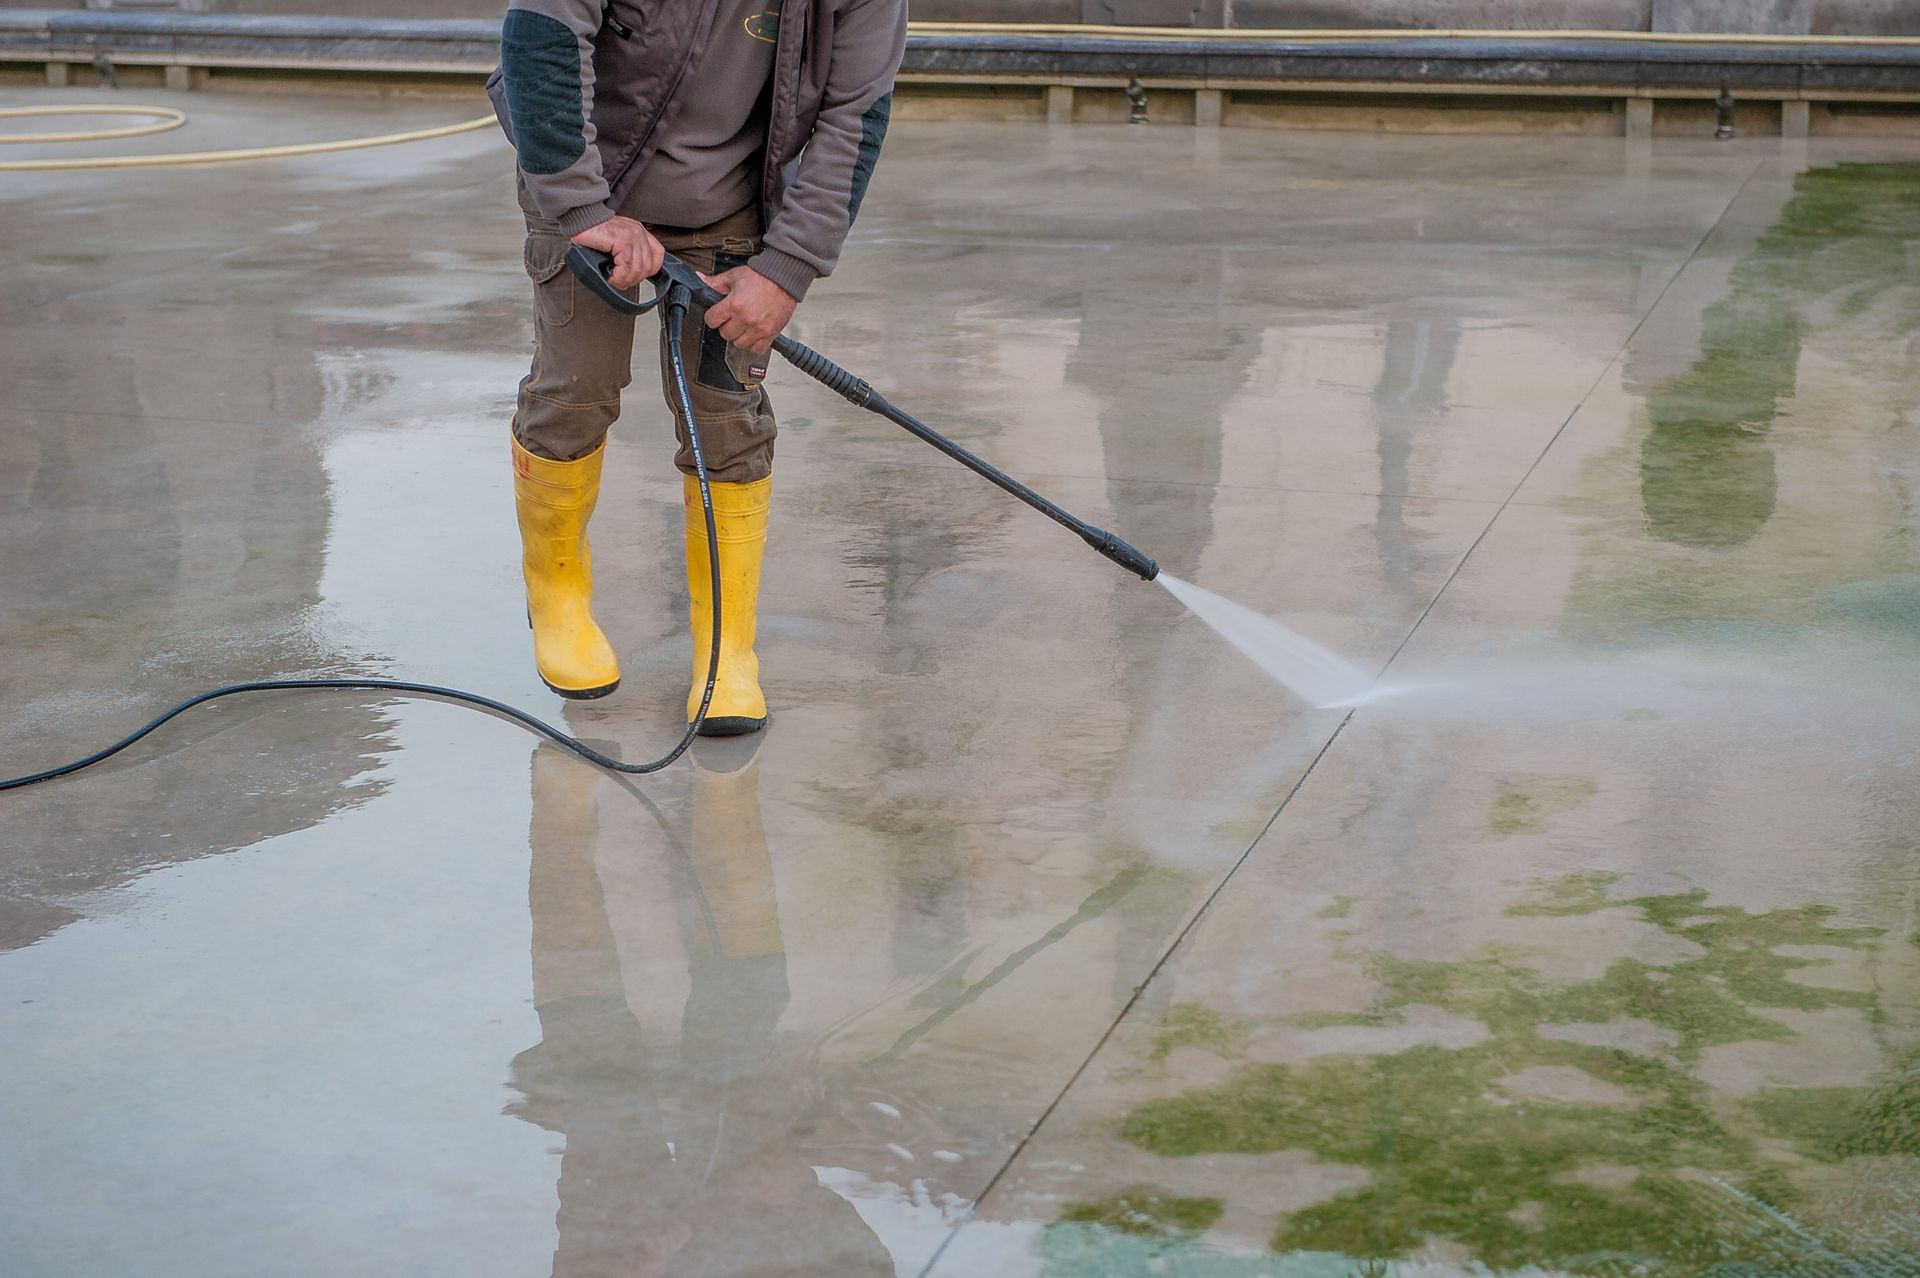 A man is cleaning a sidewalk with a high pressure washer.